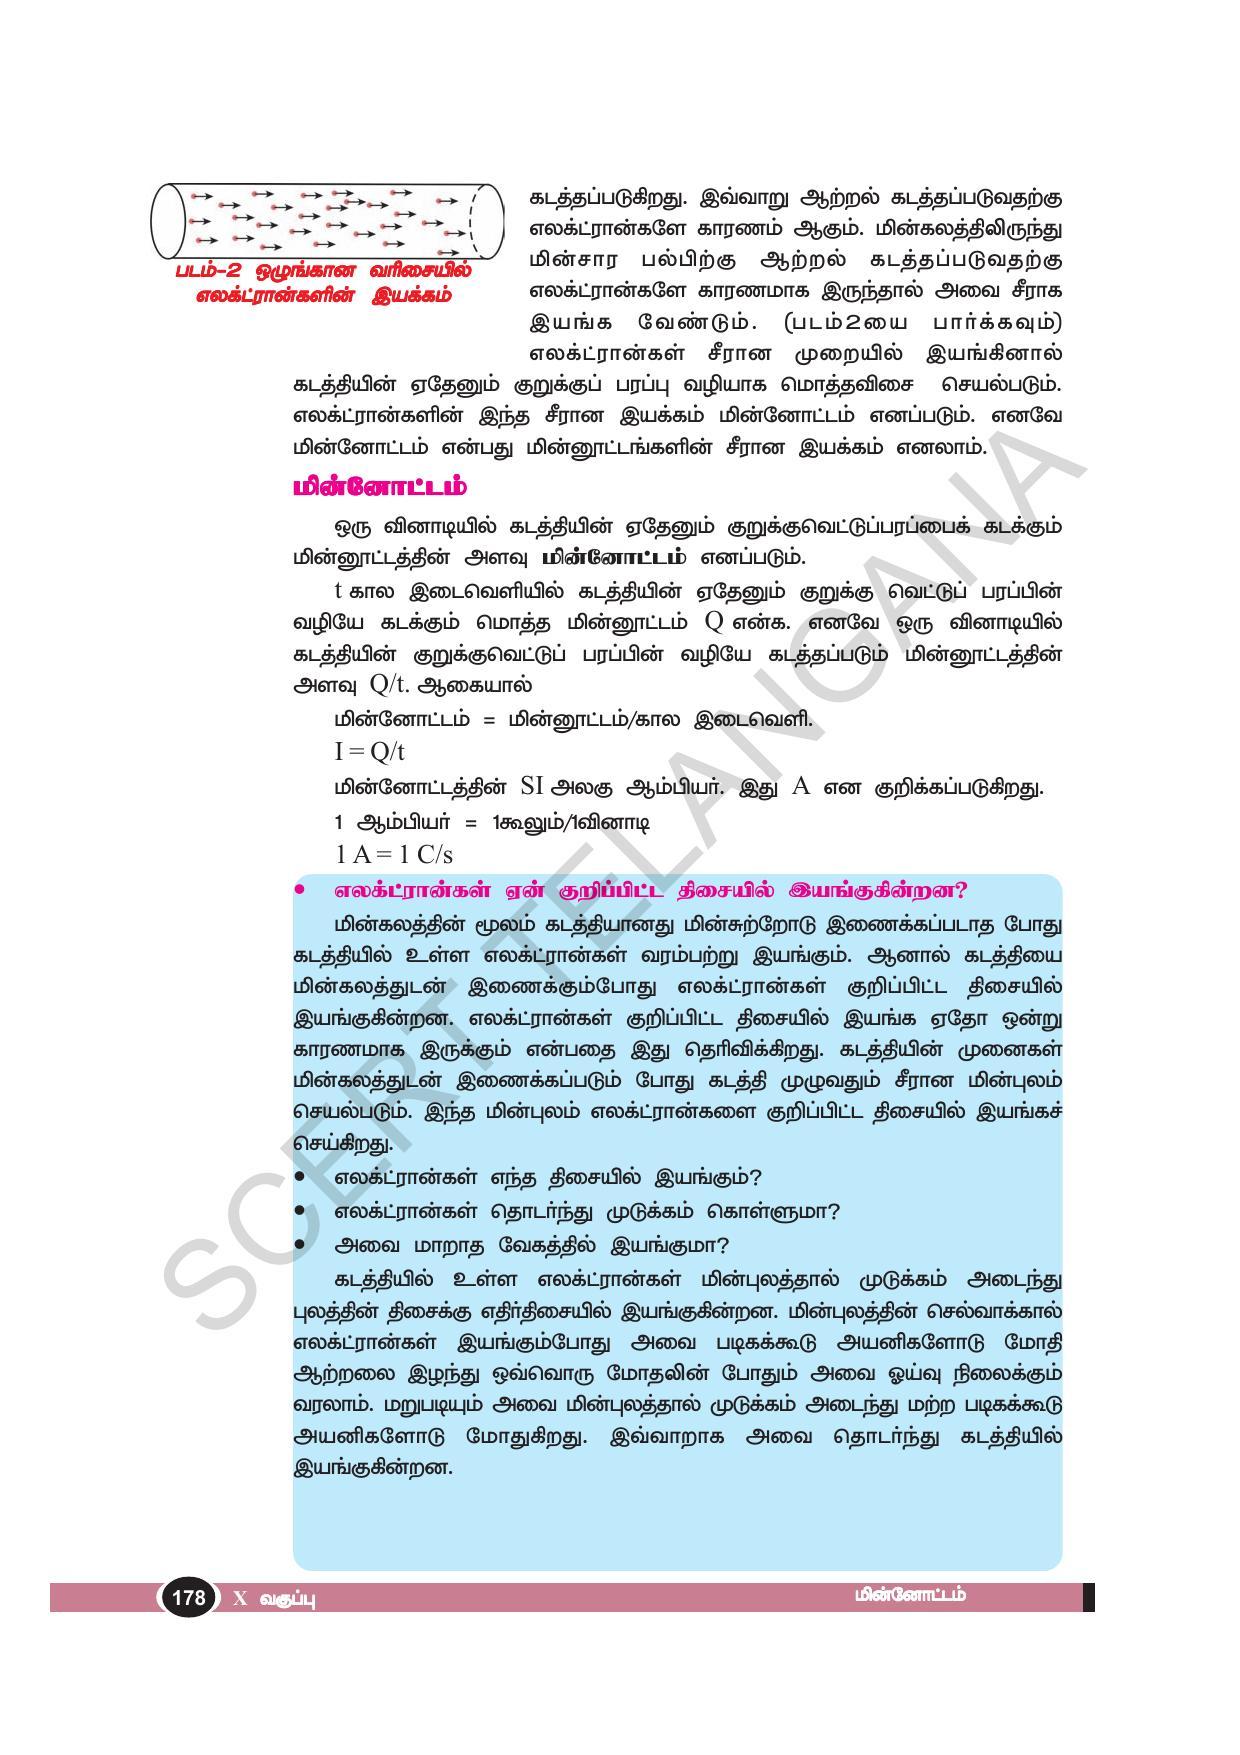 TS SCERT Class 10 Physical Science(Tamil Medium) Text Book - Page 190